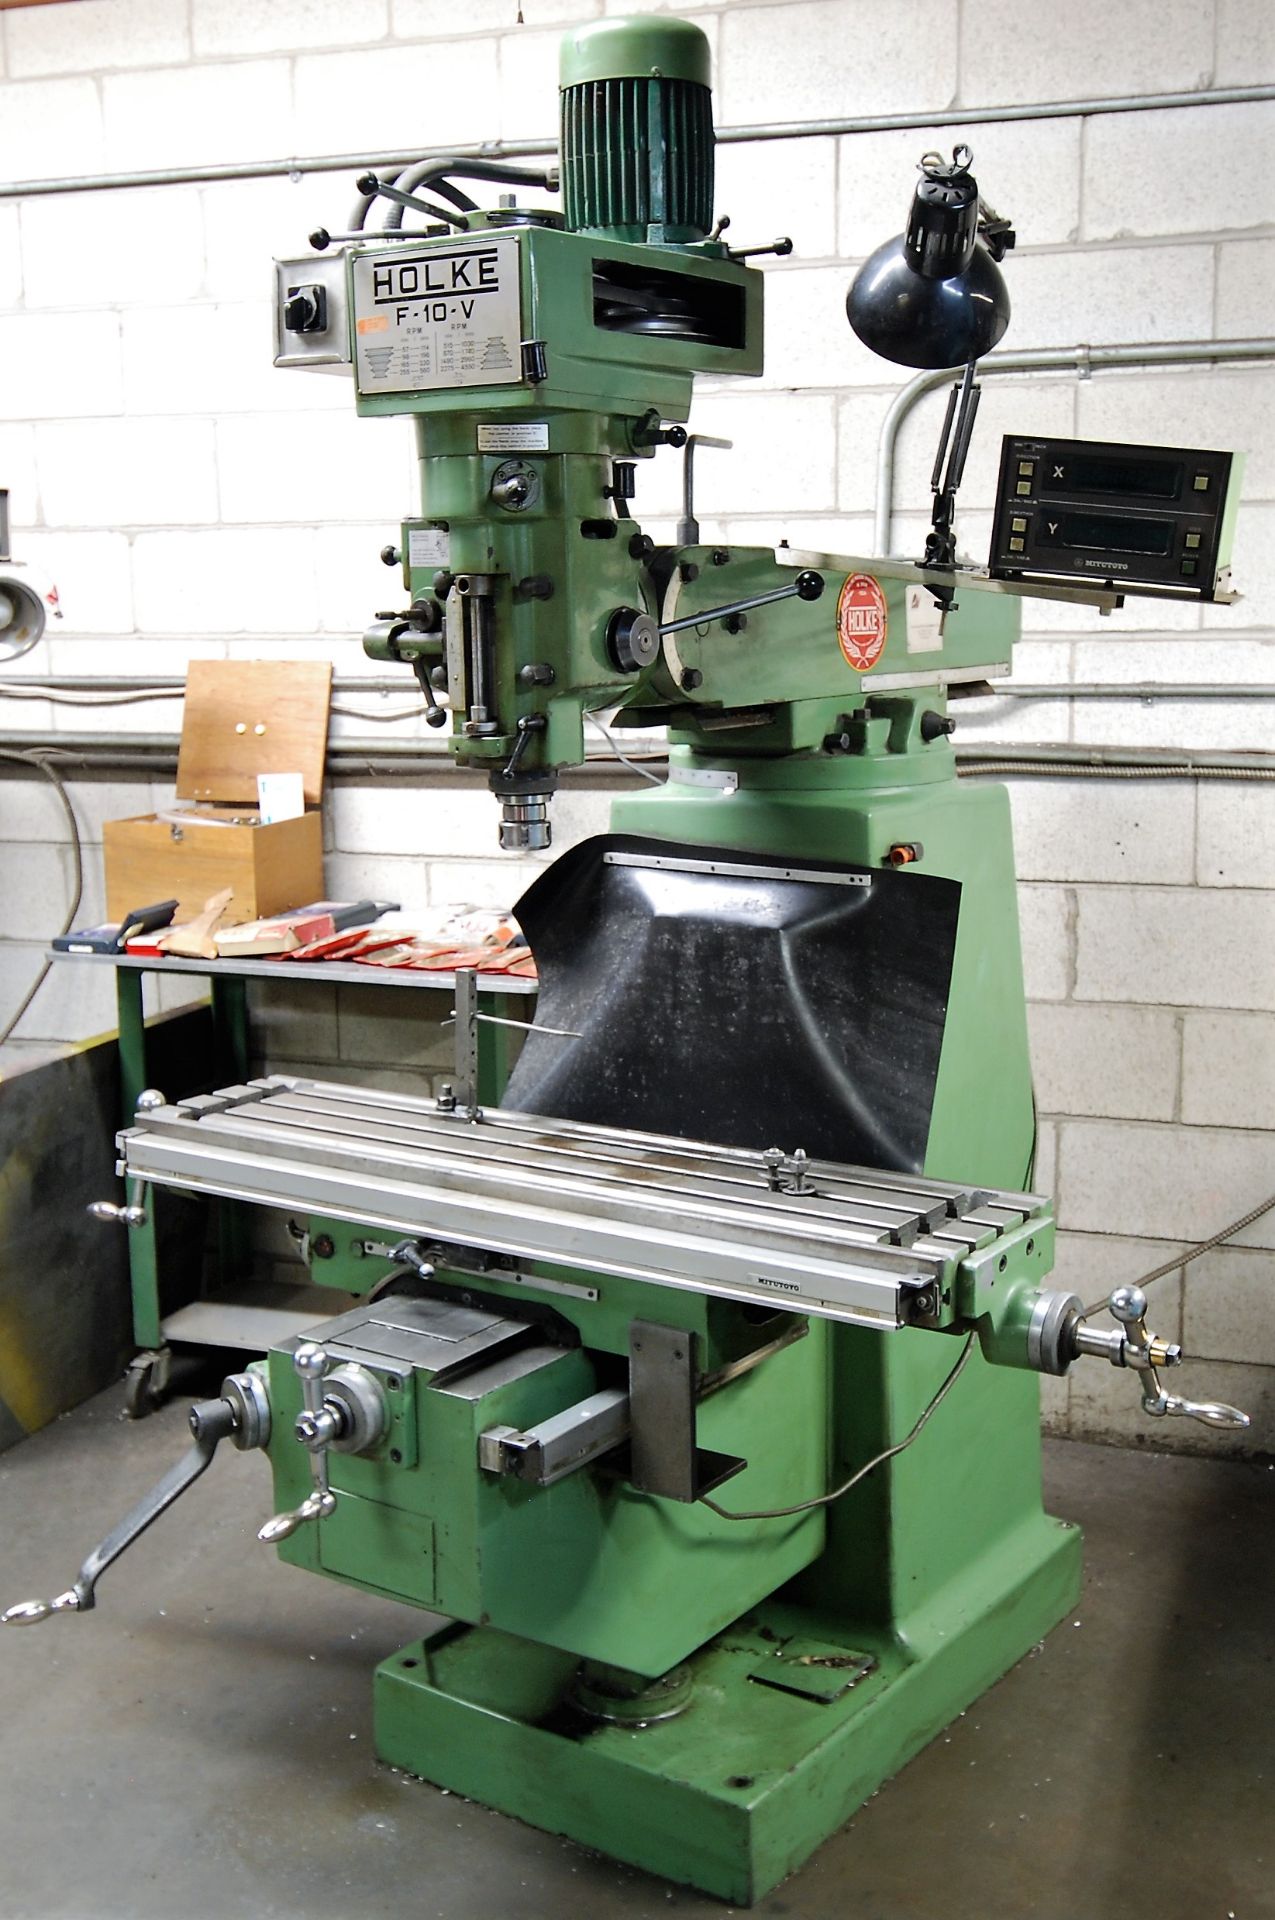 HOLKE F-10-V VERTICAL MILLING MACHINE, 10" X 44" TABLE, MITUTOYO 2-AXIS DRO, SPEEDS TO 4,550 RPM, - Image 3 of 8